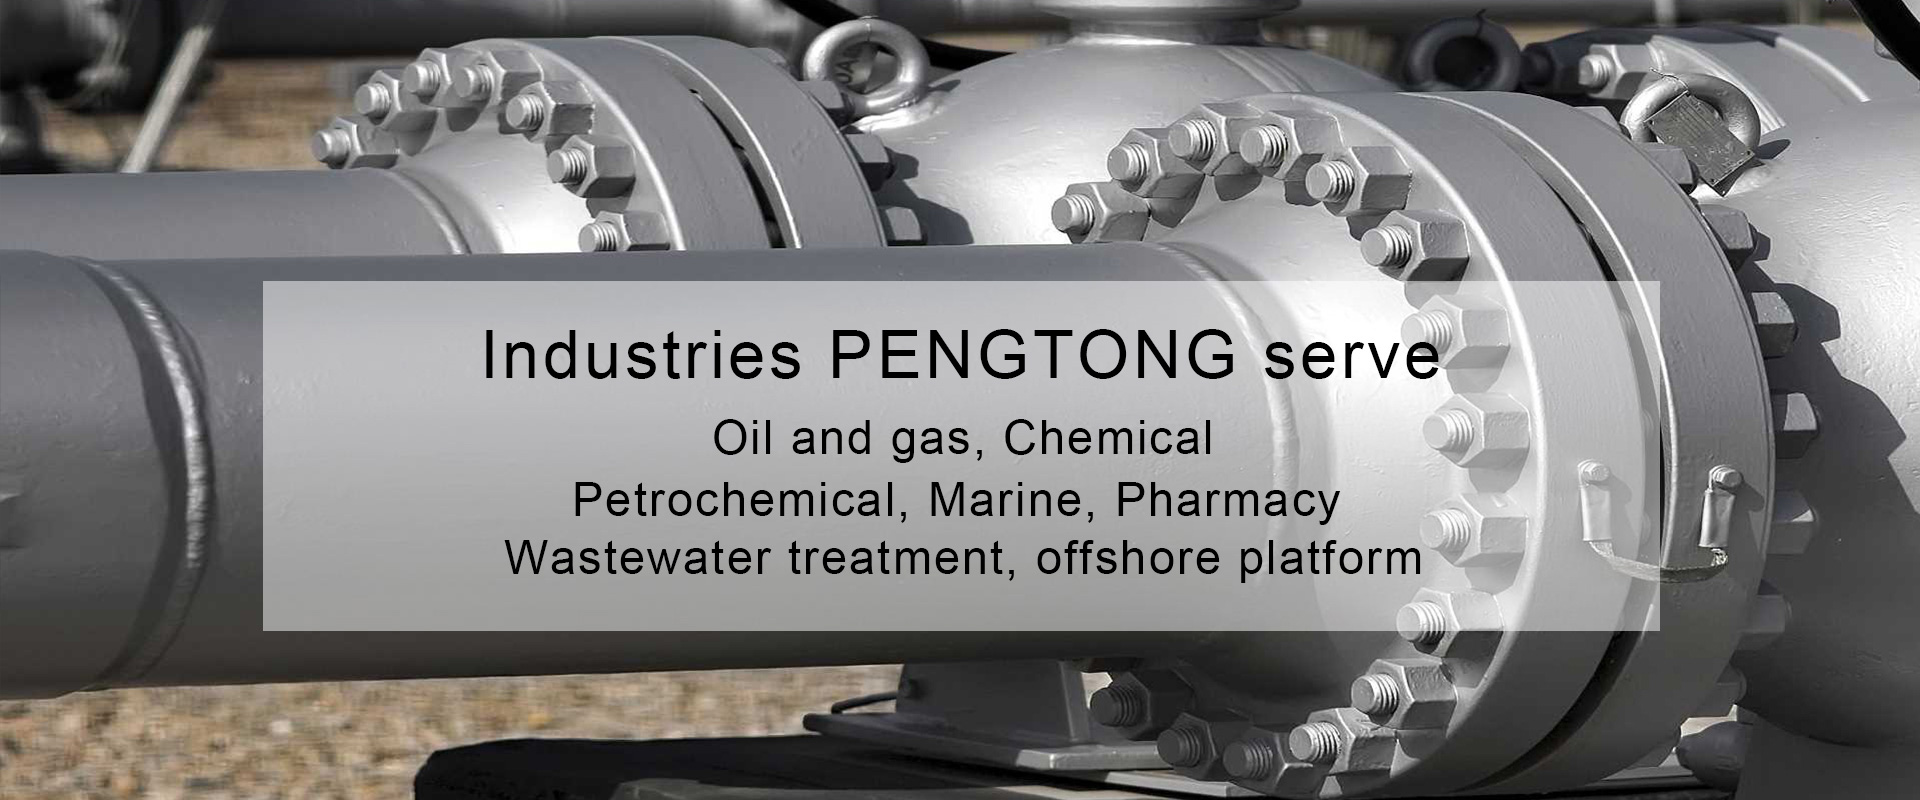 Industries of Cangzhou Pengtong Pipe Fitting Manufacturing Co., Ltd serves:  Oil and gas, Chemical  Petrochemical, Marine, Pharmacy, Wastewater treatment, offshore platform